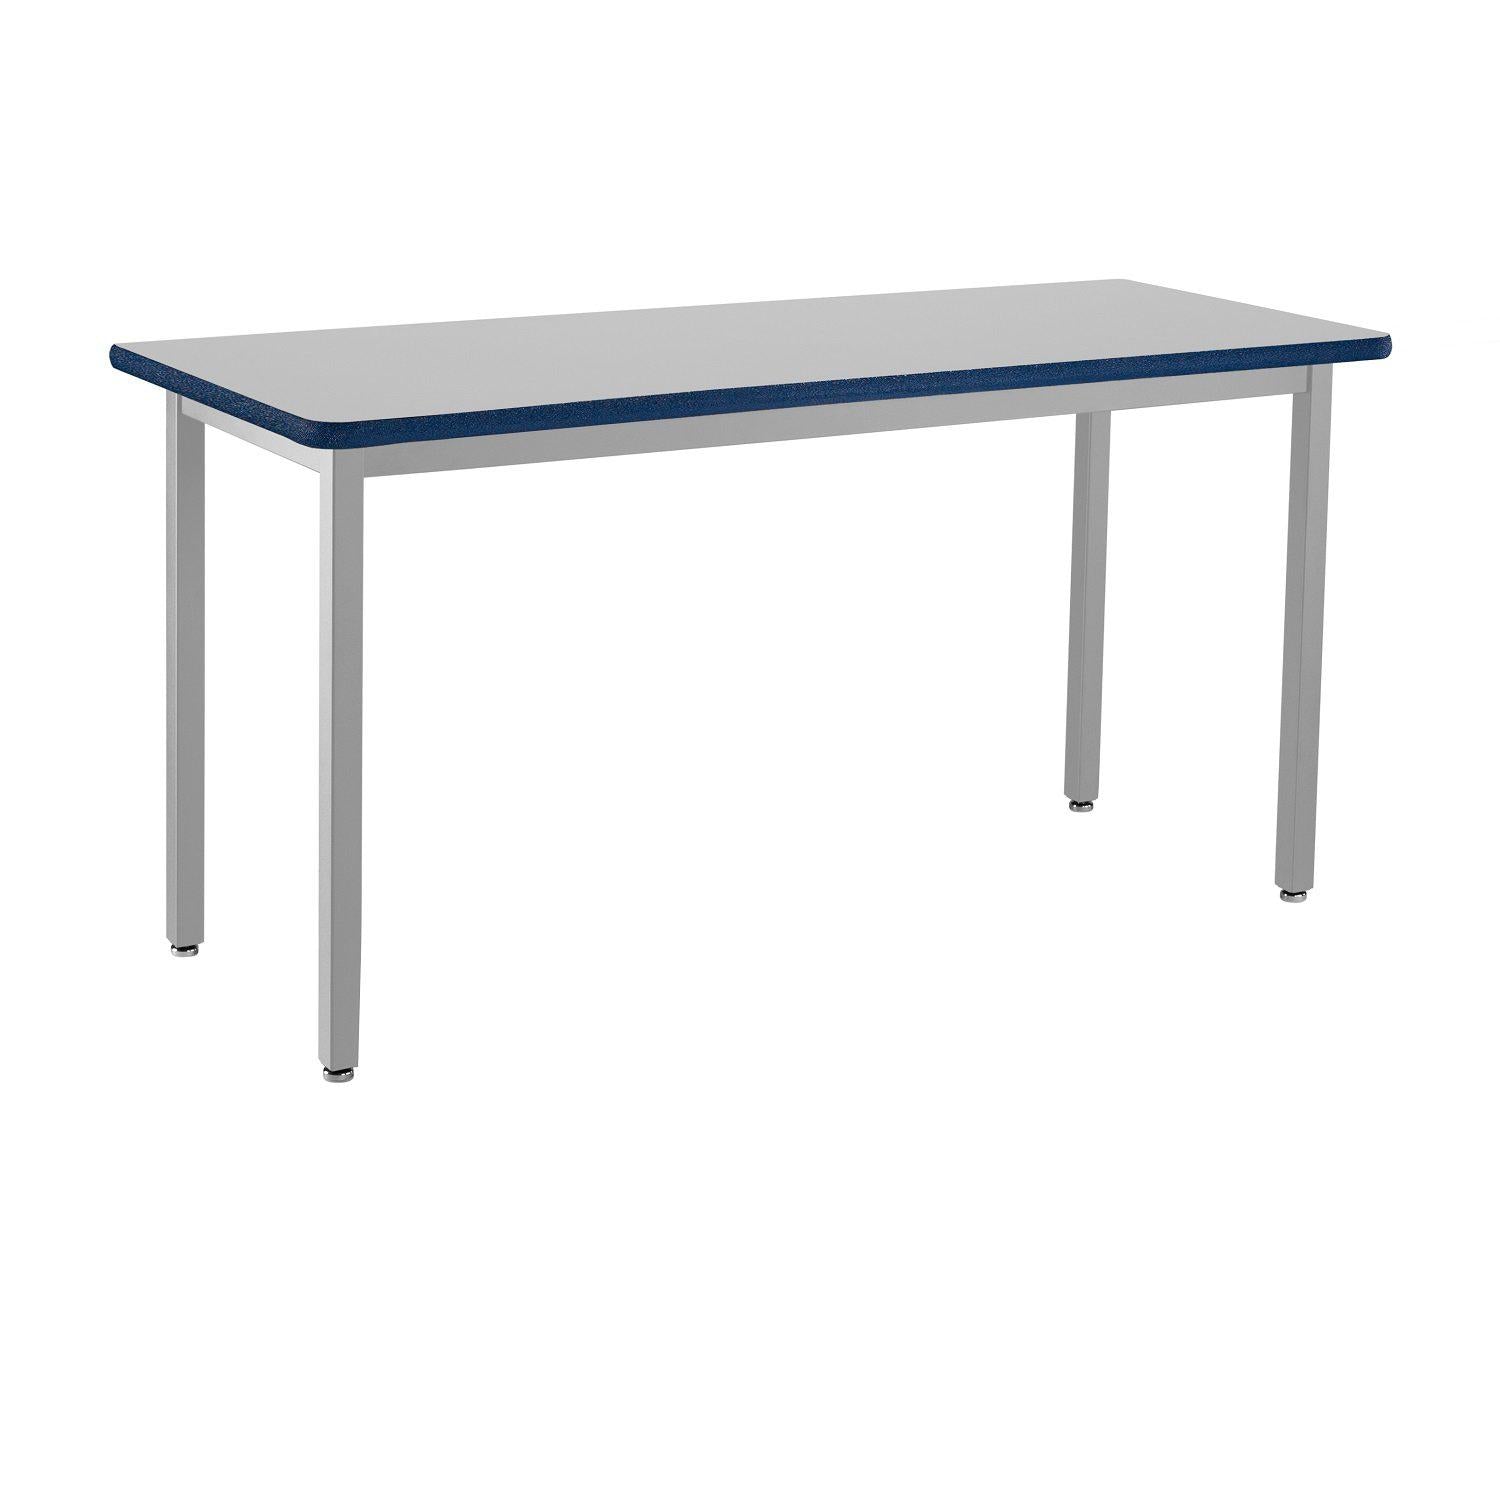 Heavy-Duty Fixed Height Utility Table, Soft Grey Frame, 30" x 48", Supreme High-Pressure Laminate Top with Black ProtectEdge